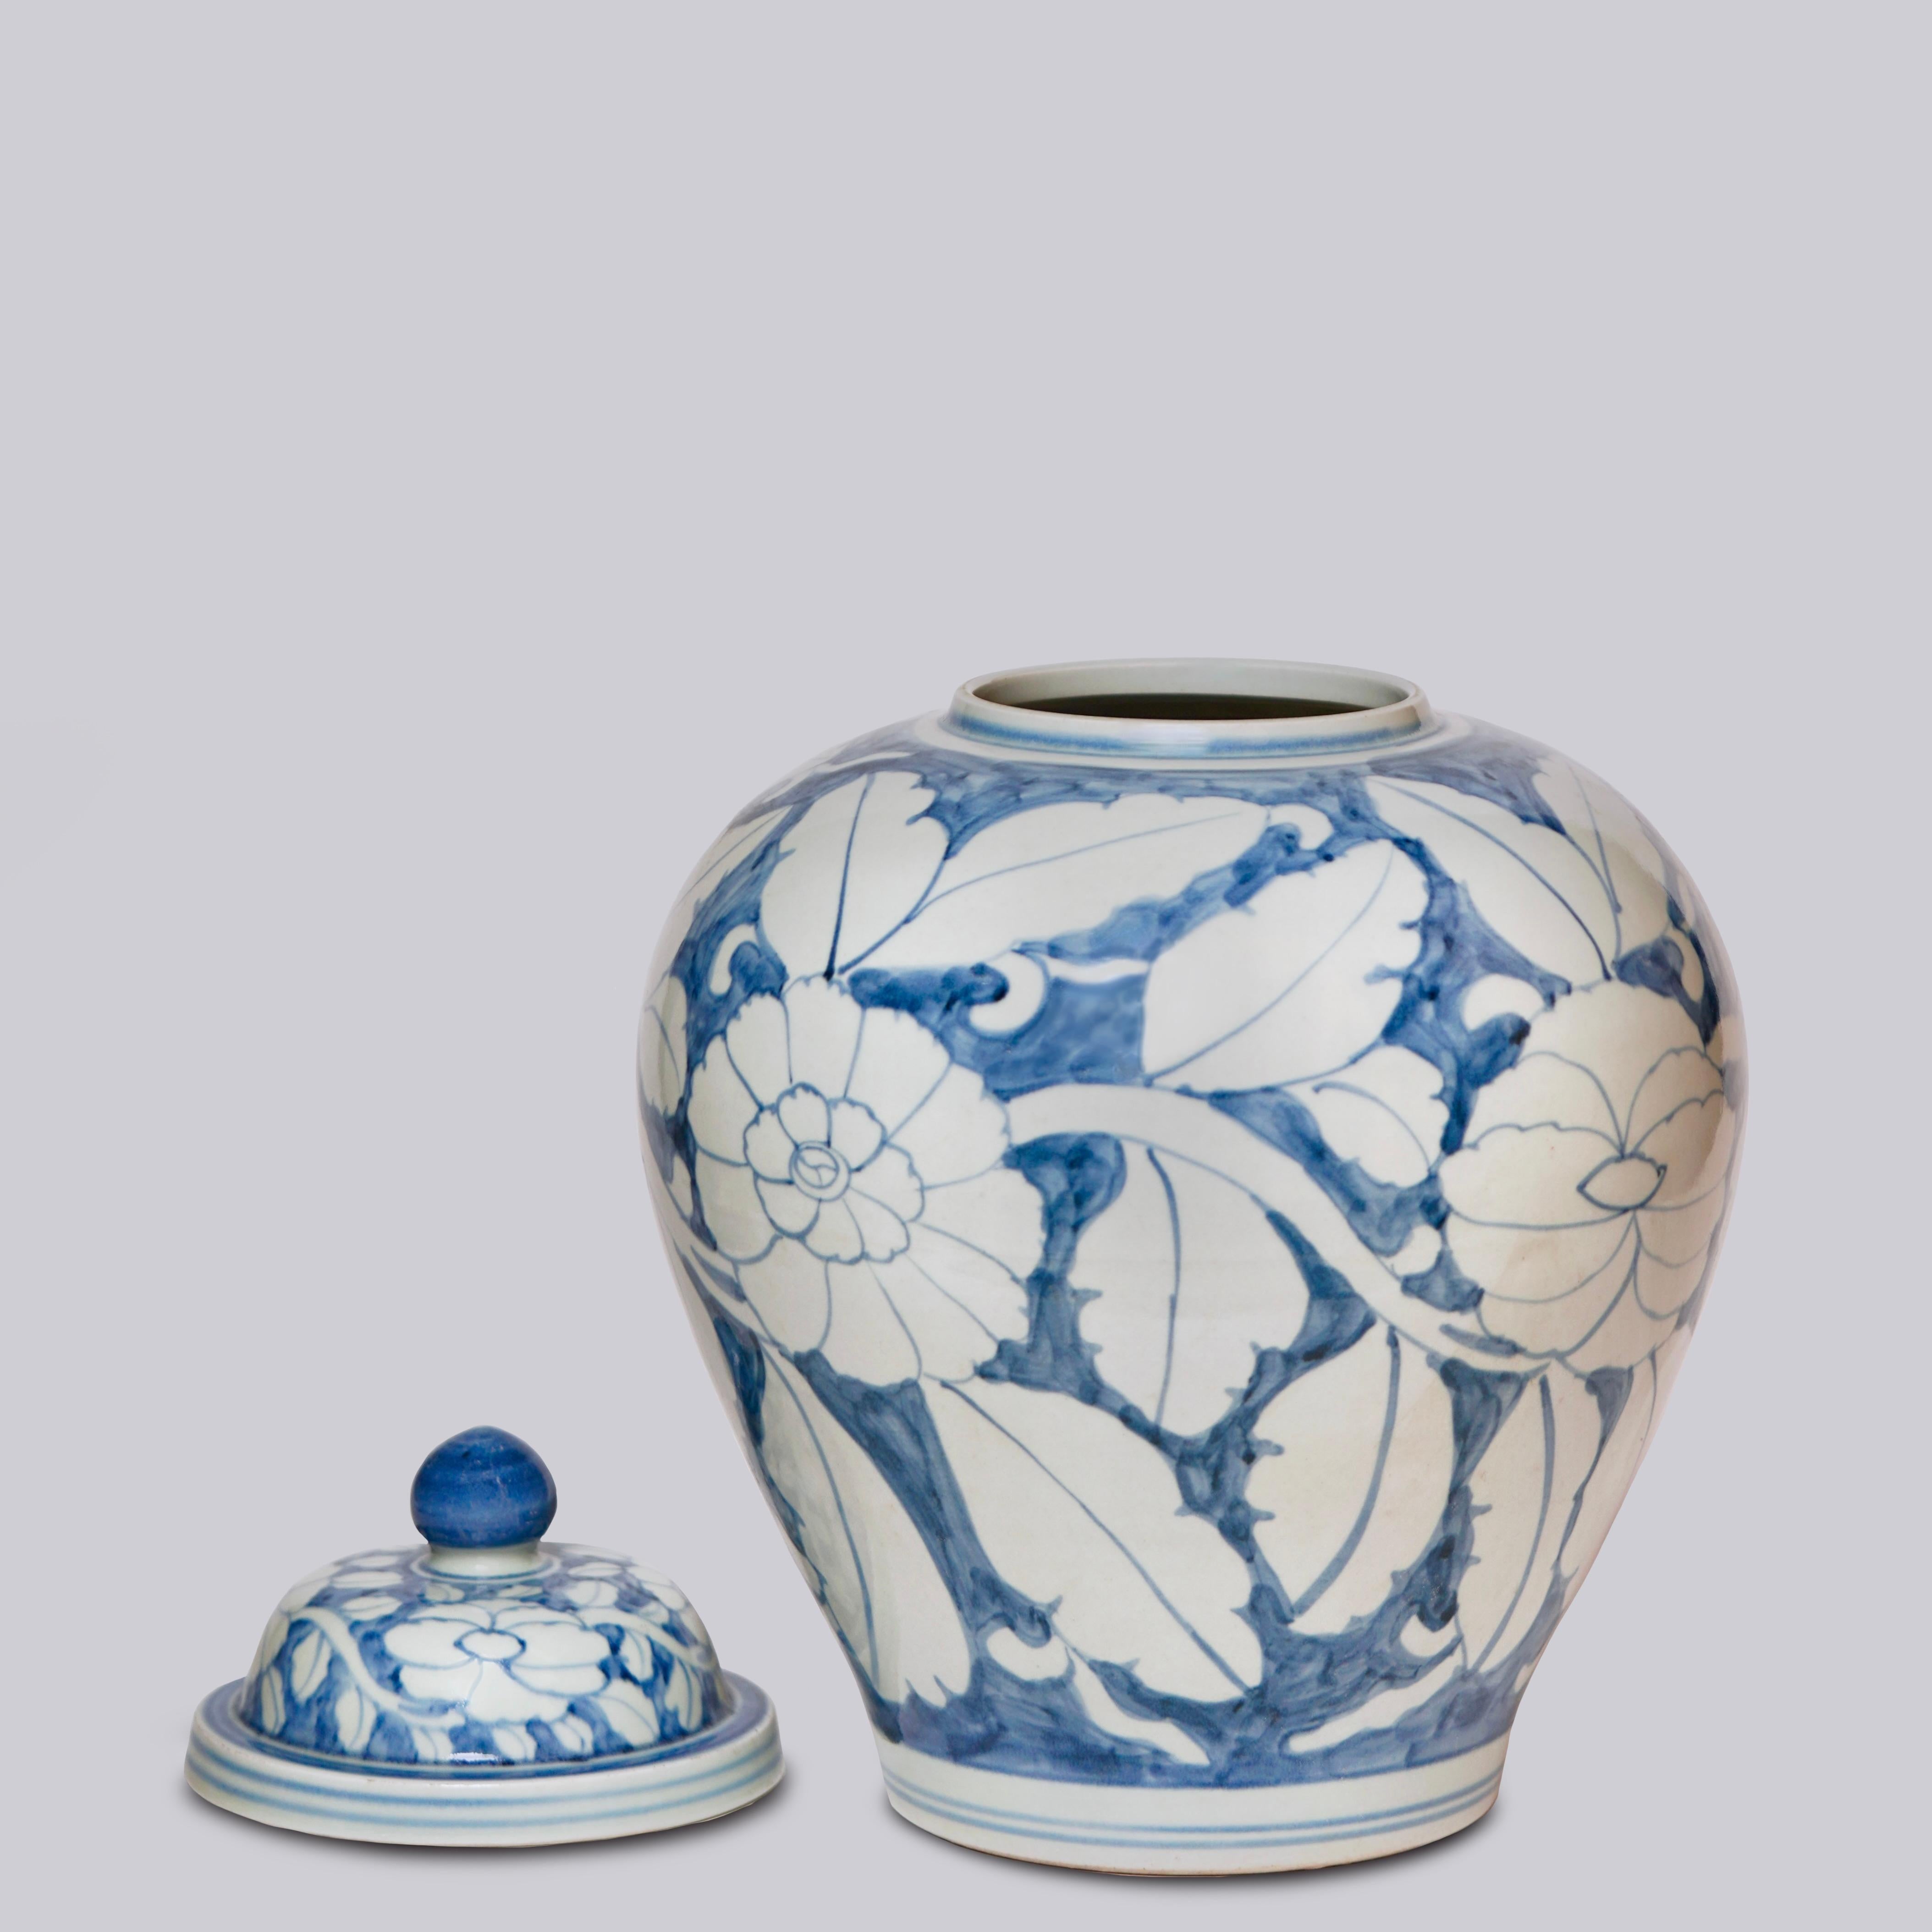 Fired Rustic Peony Blue and White Porcelain Temple Jar